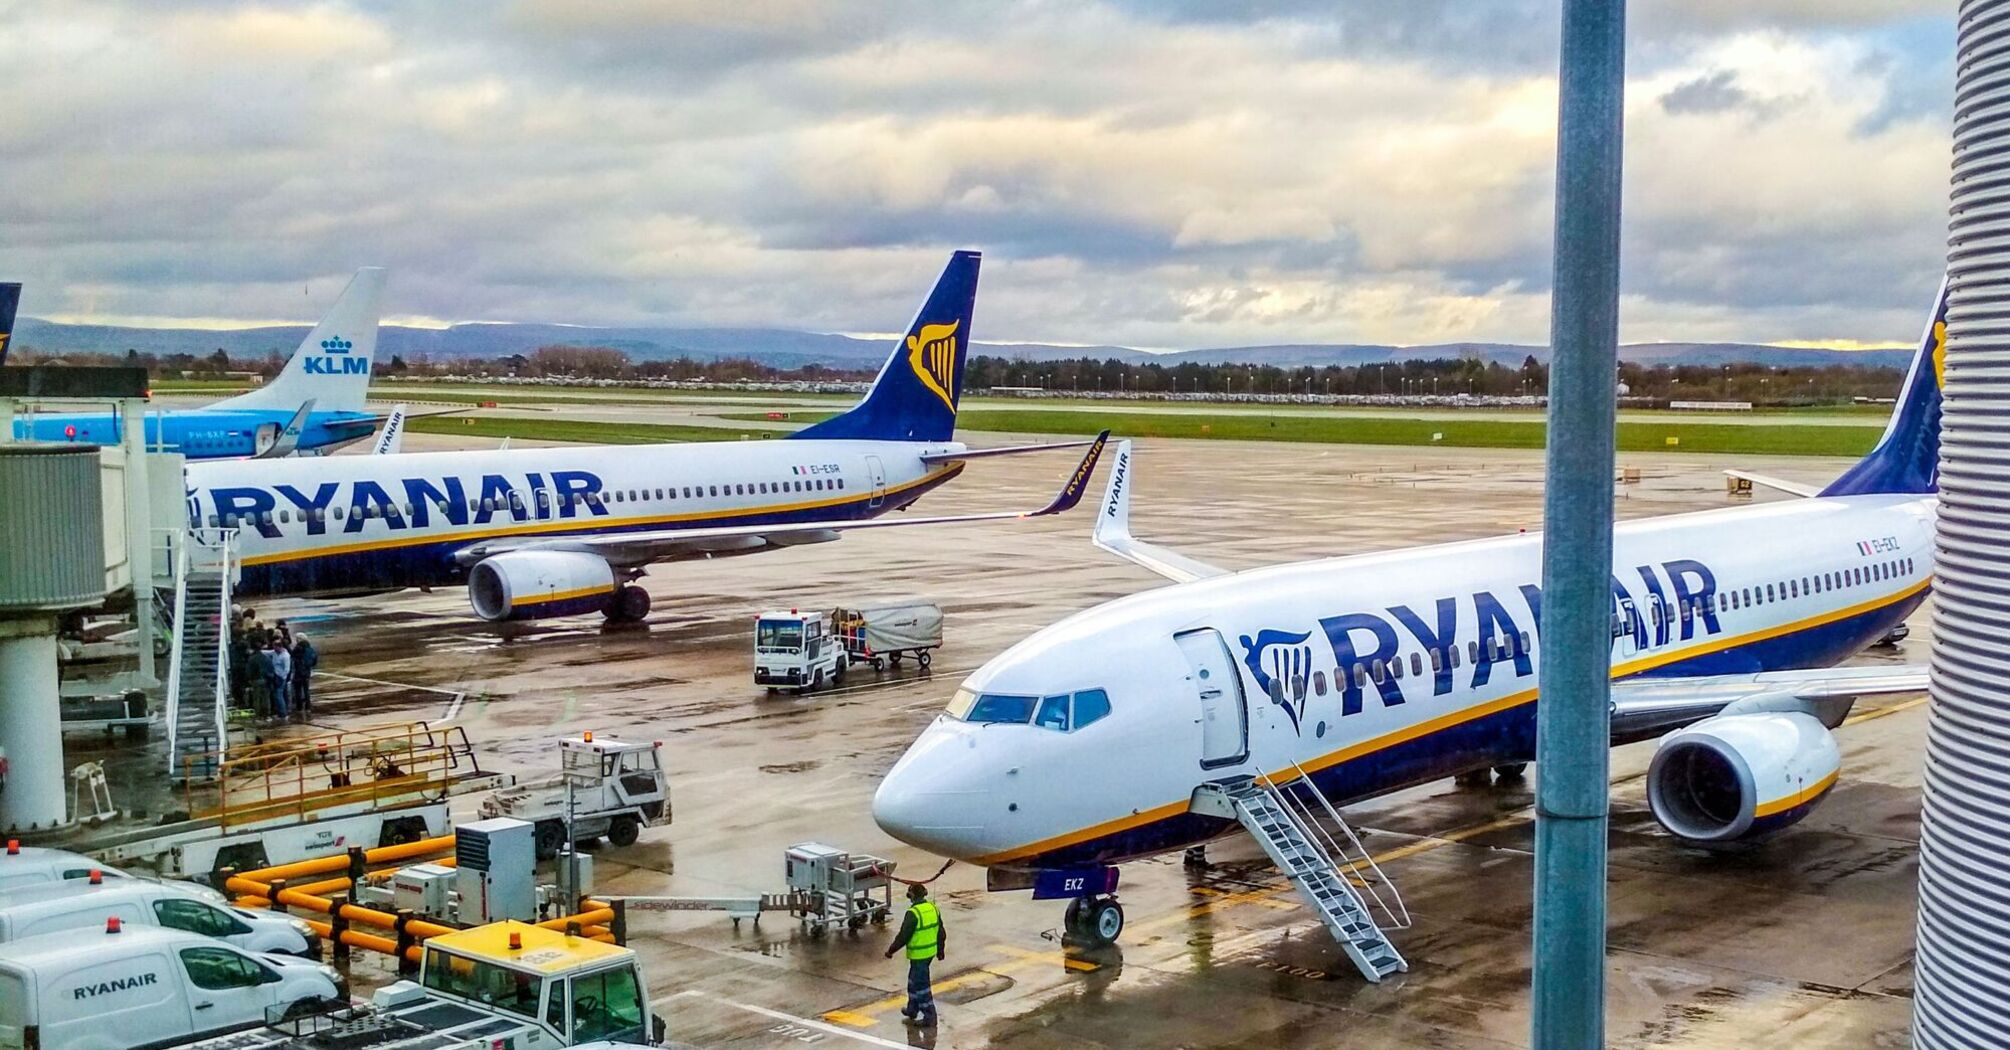 Ryanair and KLM aircraft parked at airport gates with ground service equipment